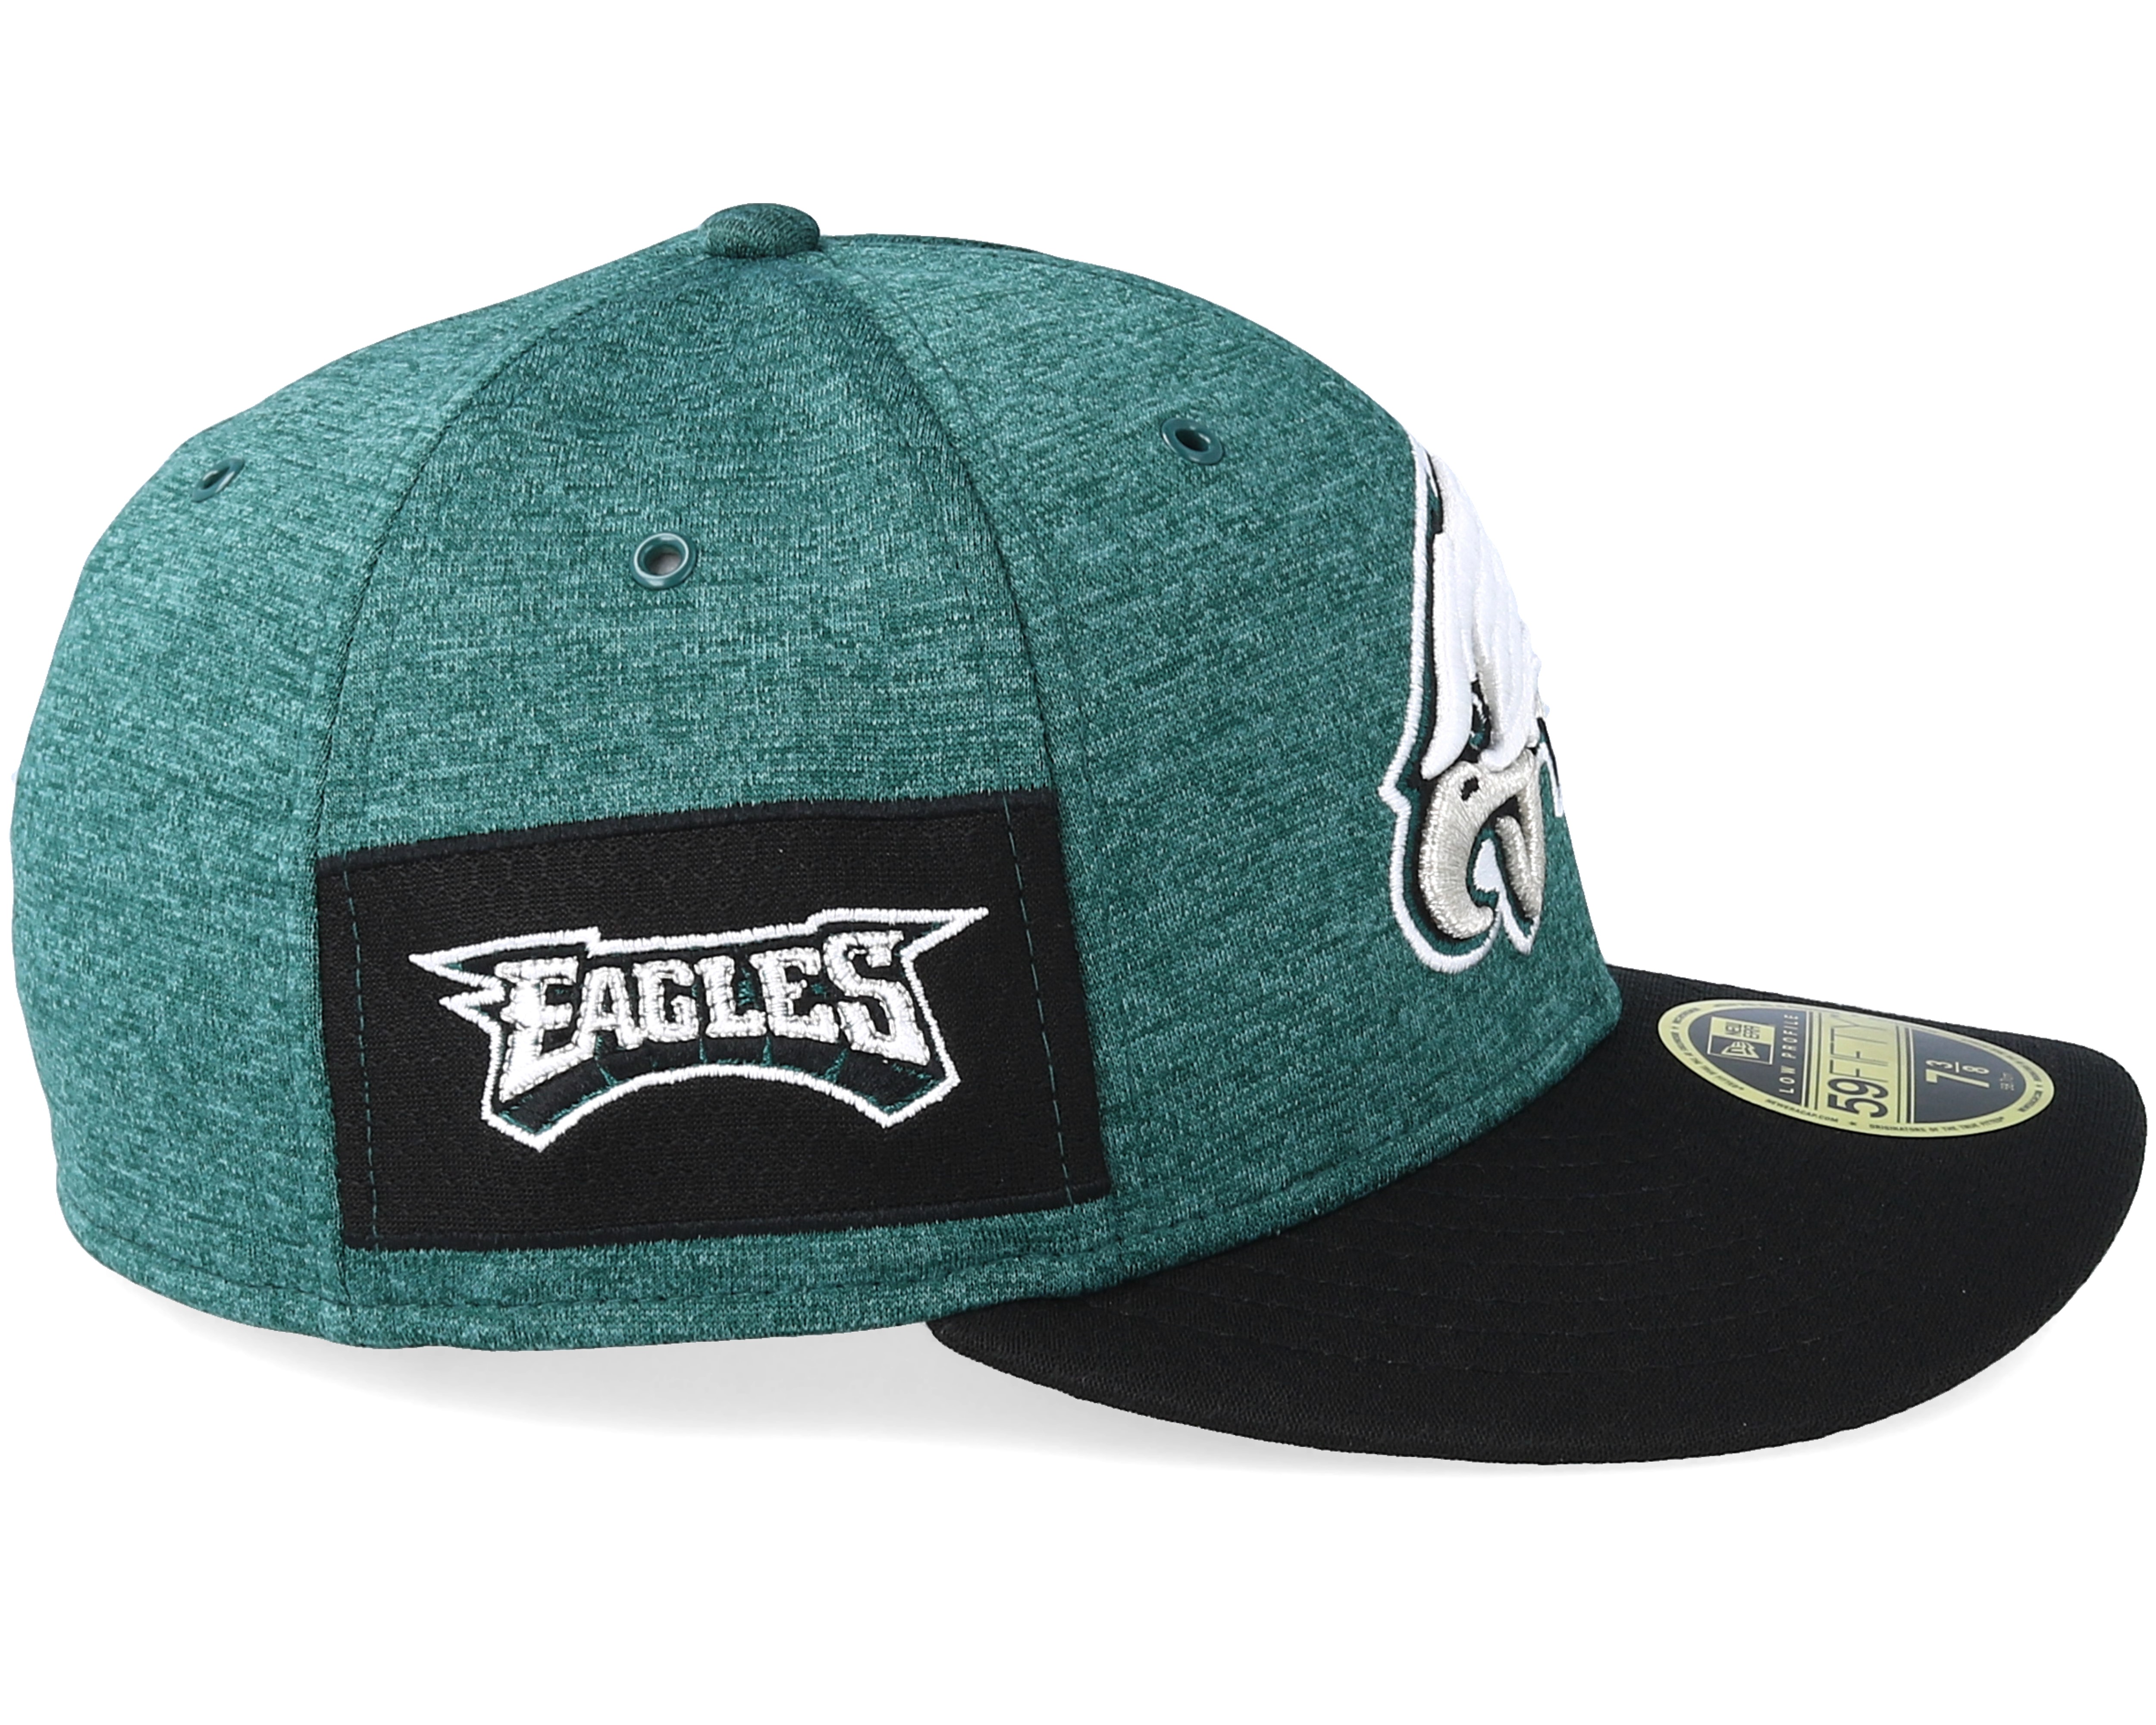 Philadelphia Eagles Low Pro 59Fifty Teal/Black Fitted - New Era caps ...